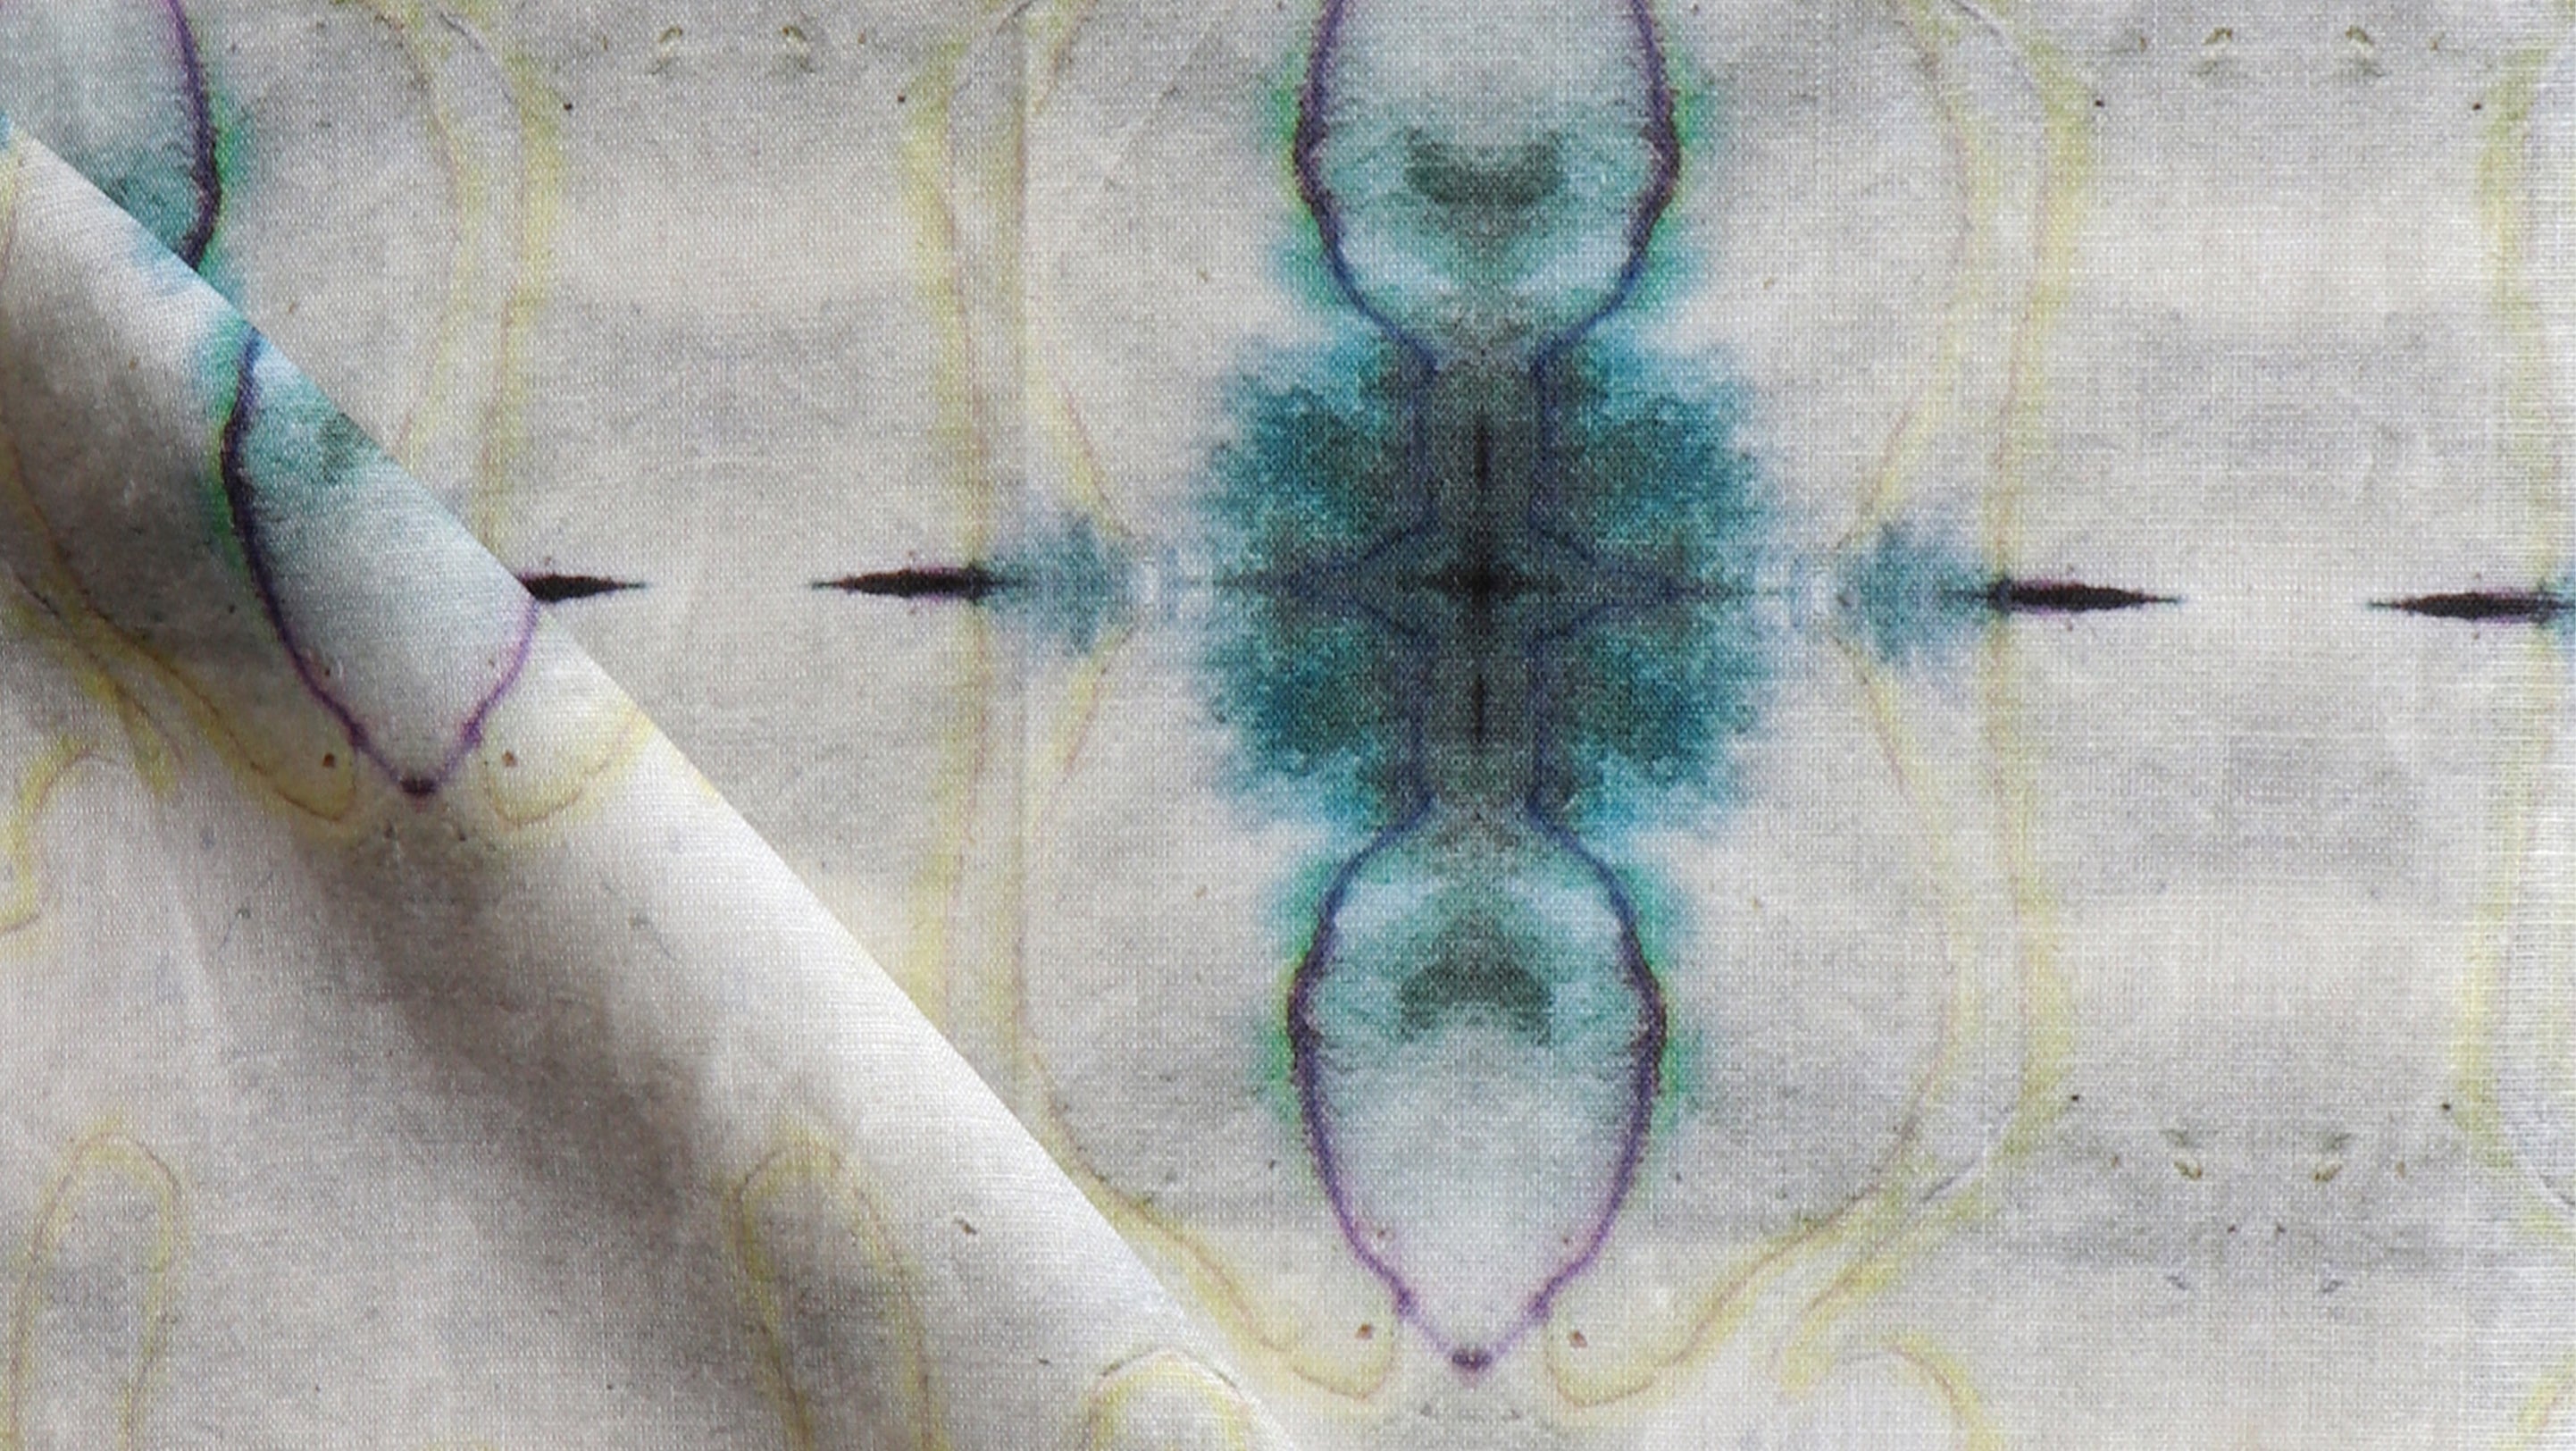 A close up of a fabric with a blue and green design